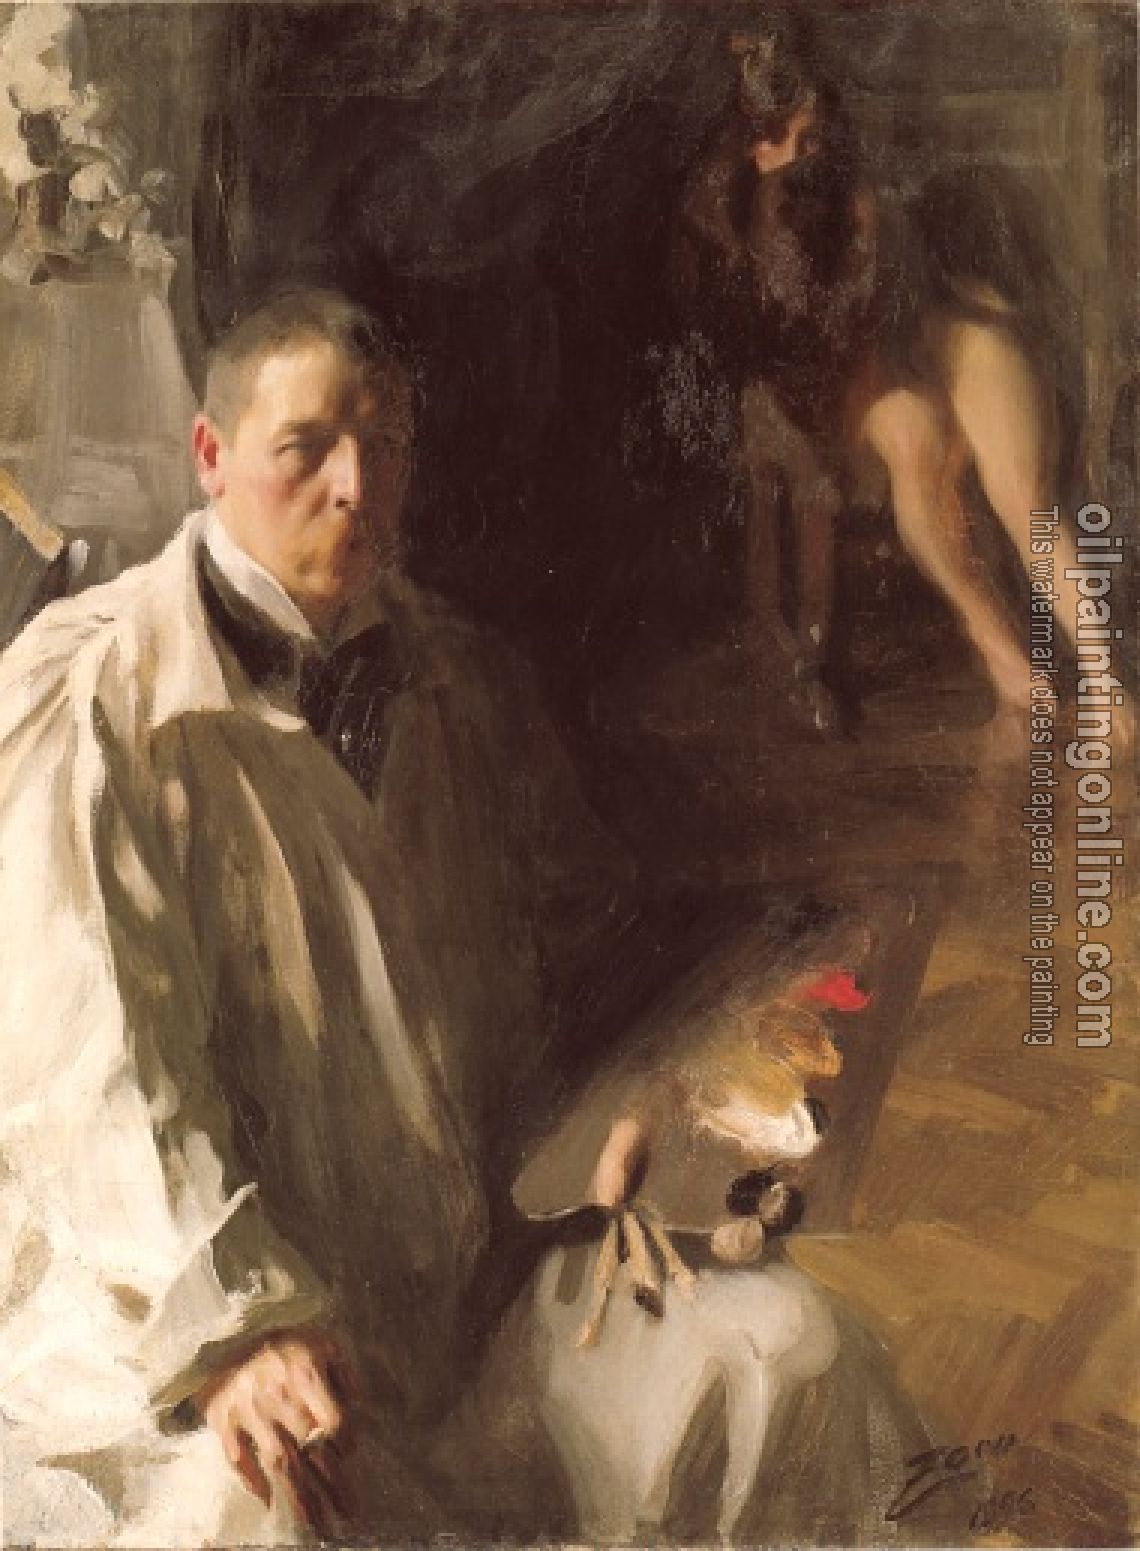 Zorn, Anders - Self-Portrait with a model